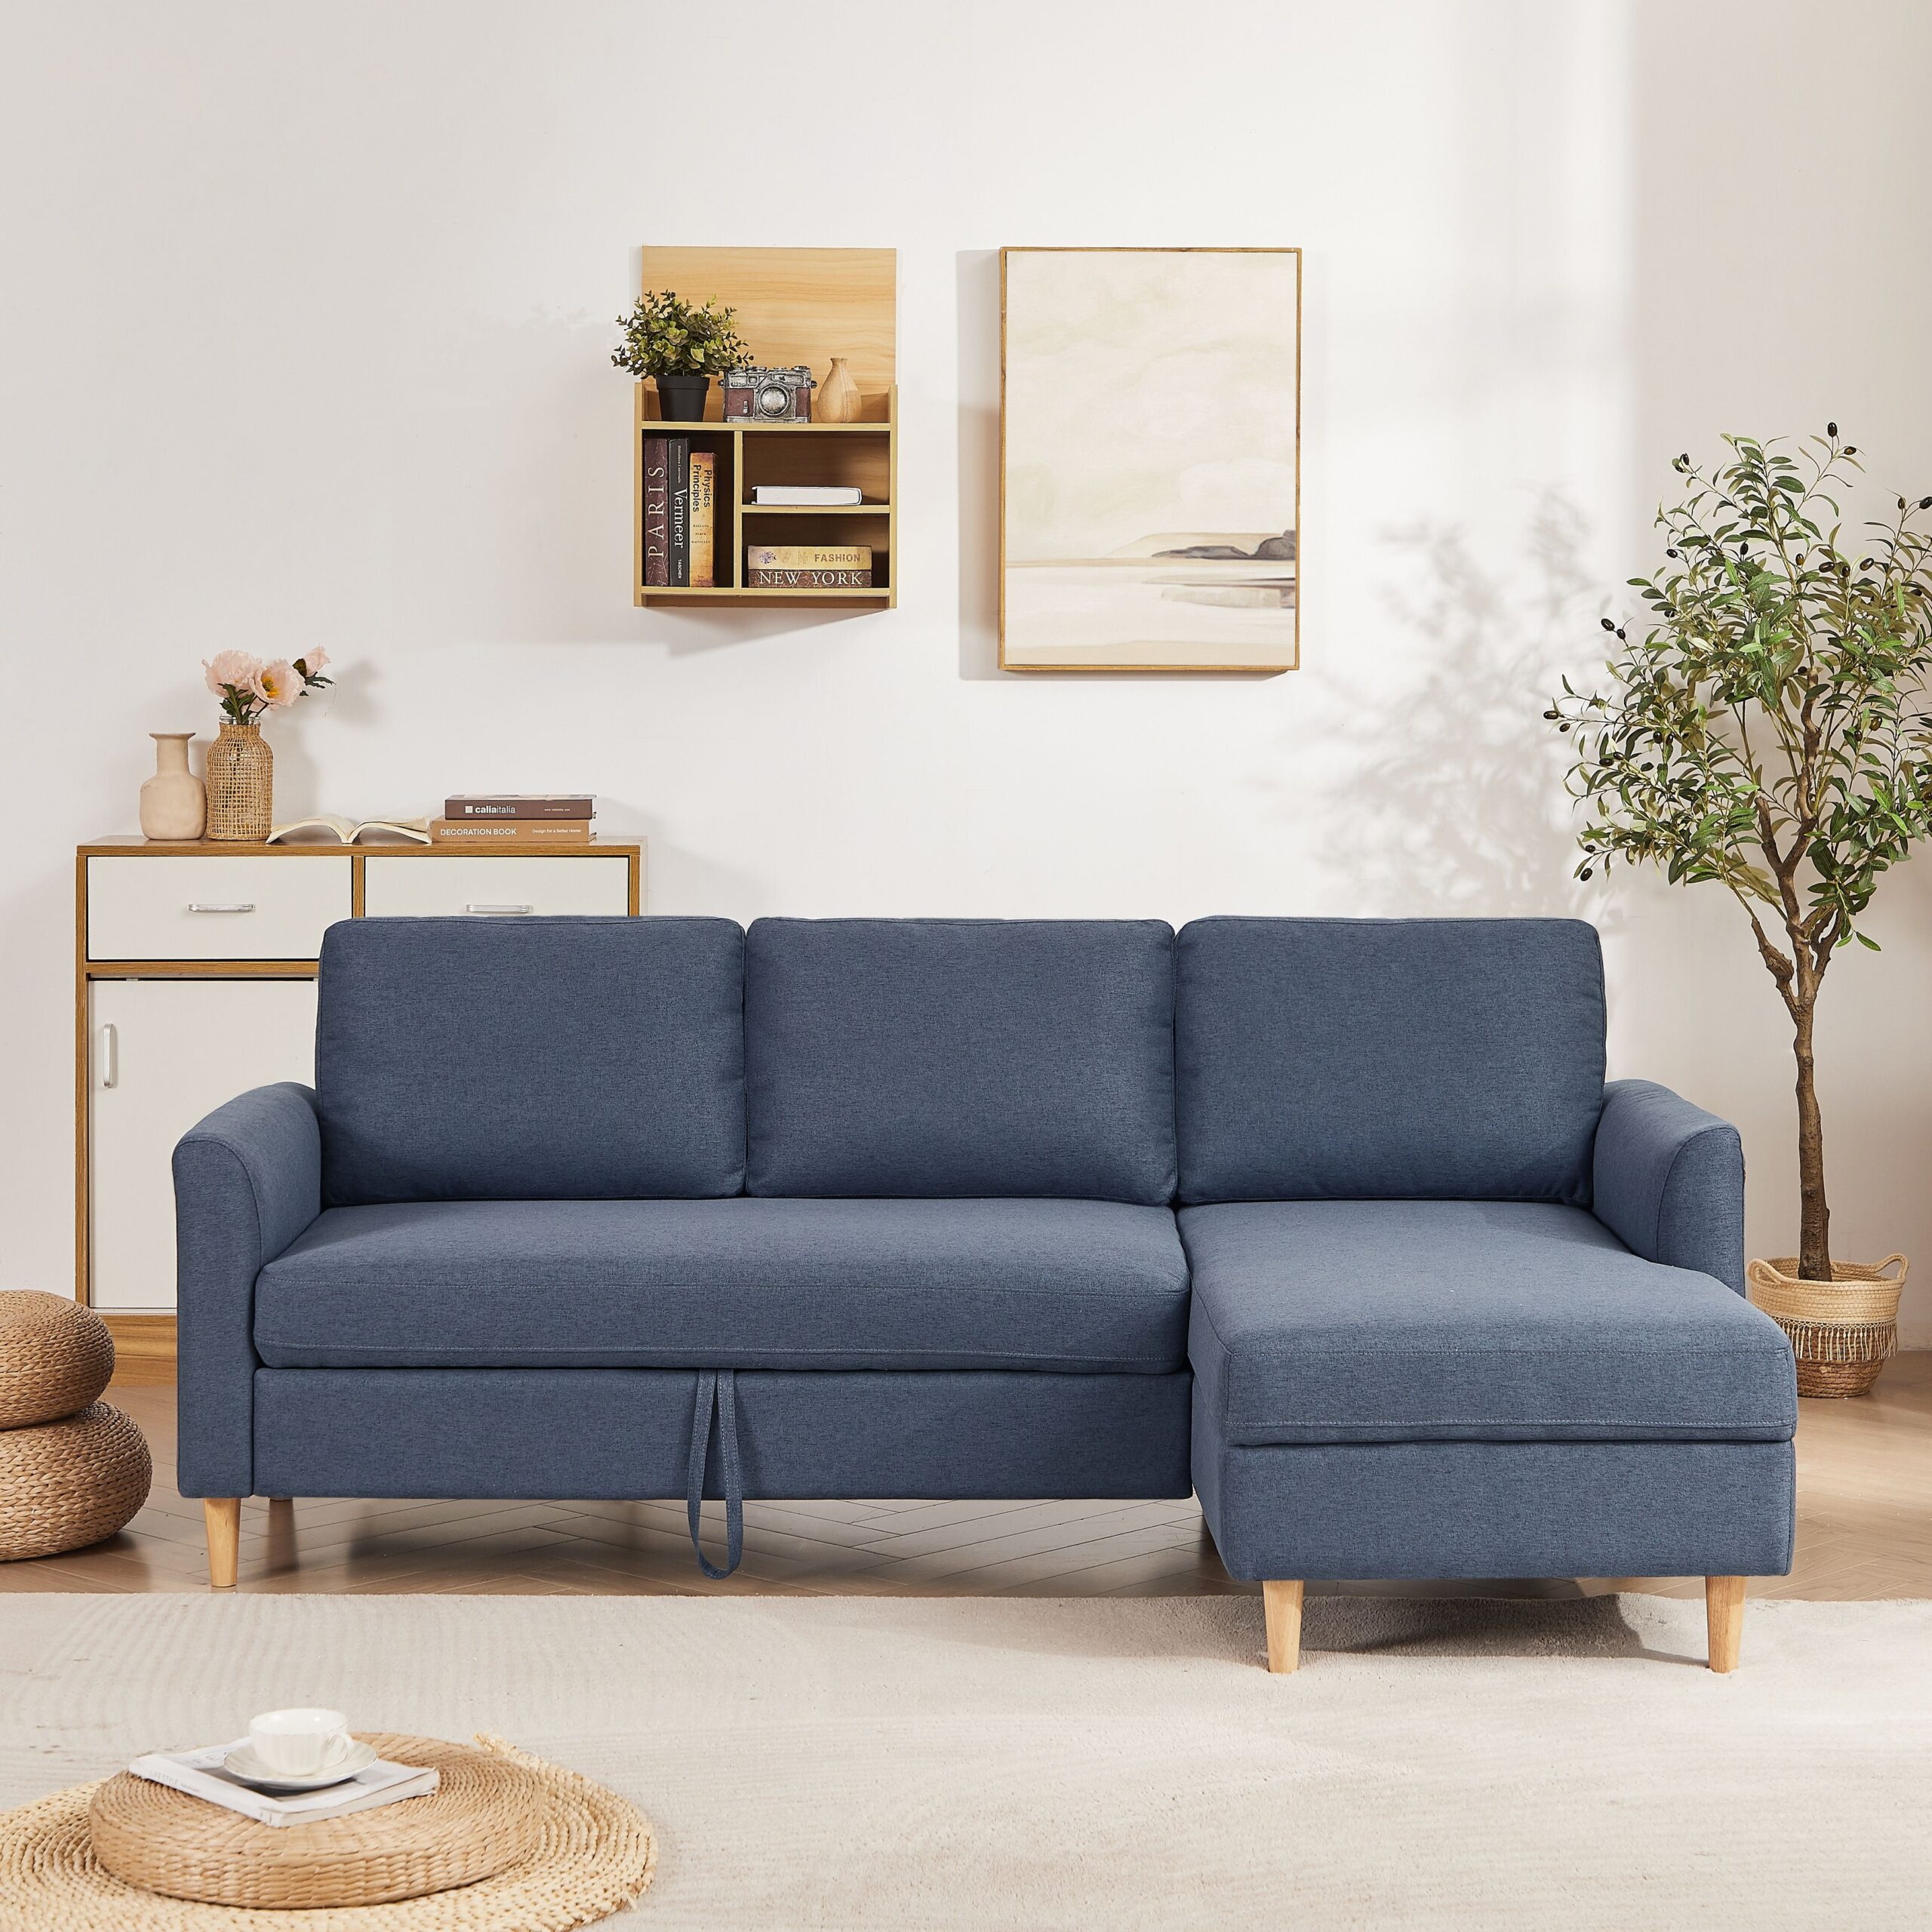 The Ultimate Guide to L Shaped Sectional Sleeper Sofas: Comfort, Style, and Functionality